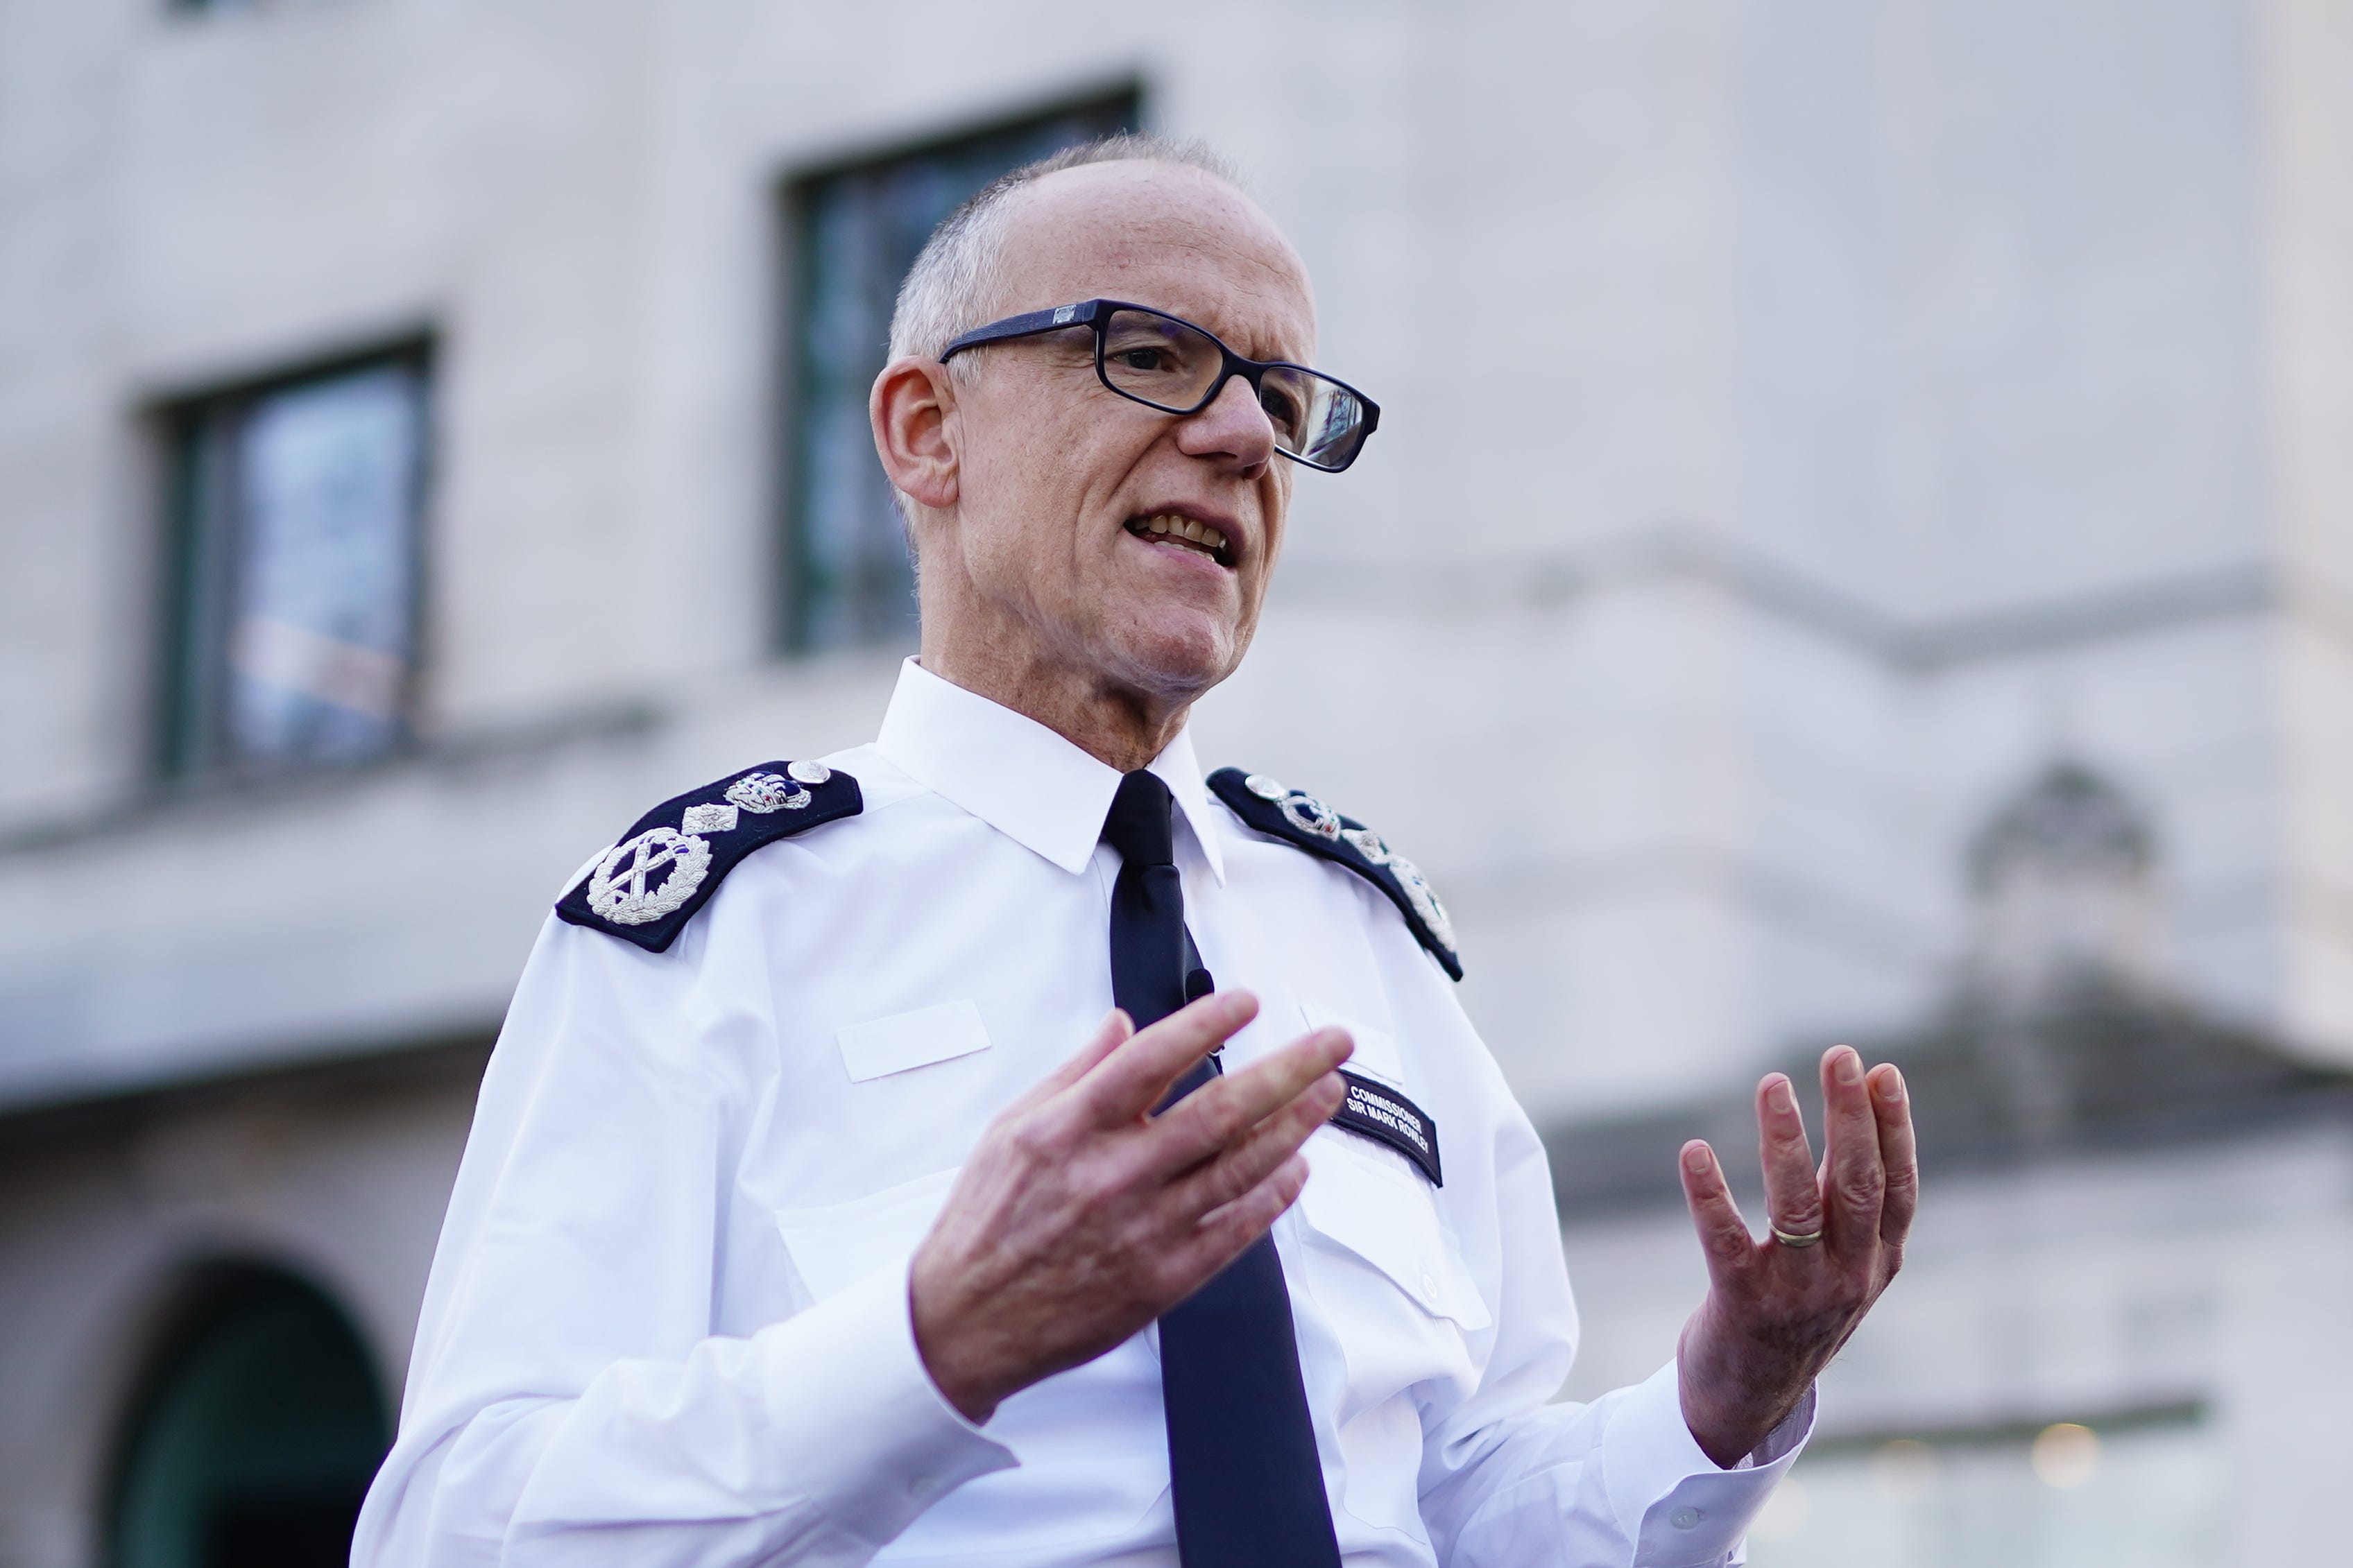 Low Trust in Metropolitan Police Discouraging Some Parents from Reporting Missing Children, Warns Report